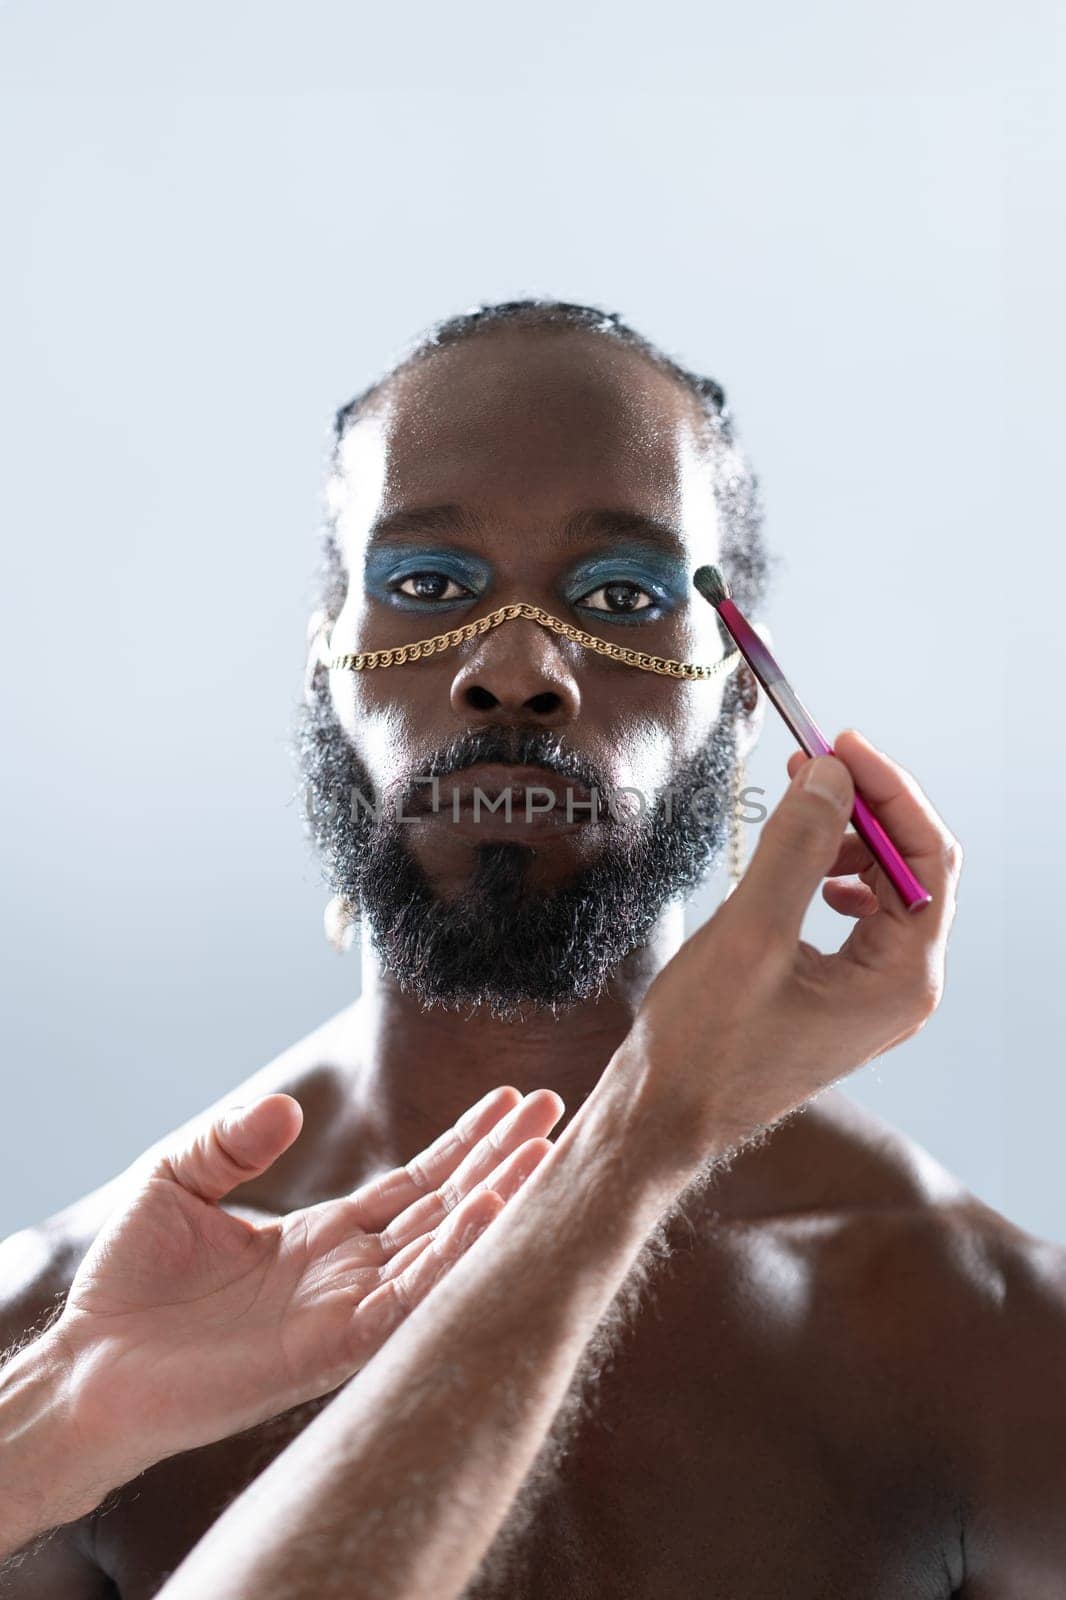 Black gay wearing make-up and hands makeup artist holding make up brush. Close up portrait homosexual man looking at camera ready for apply visage on face. Fashion lgbt concept.